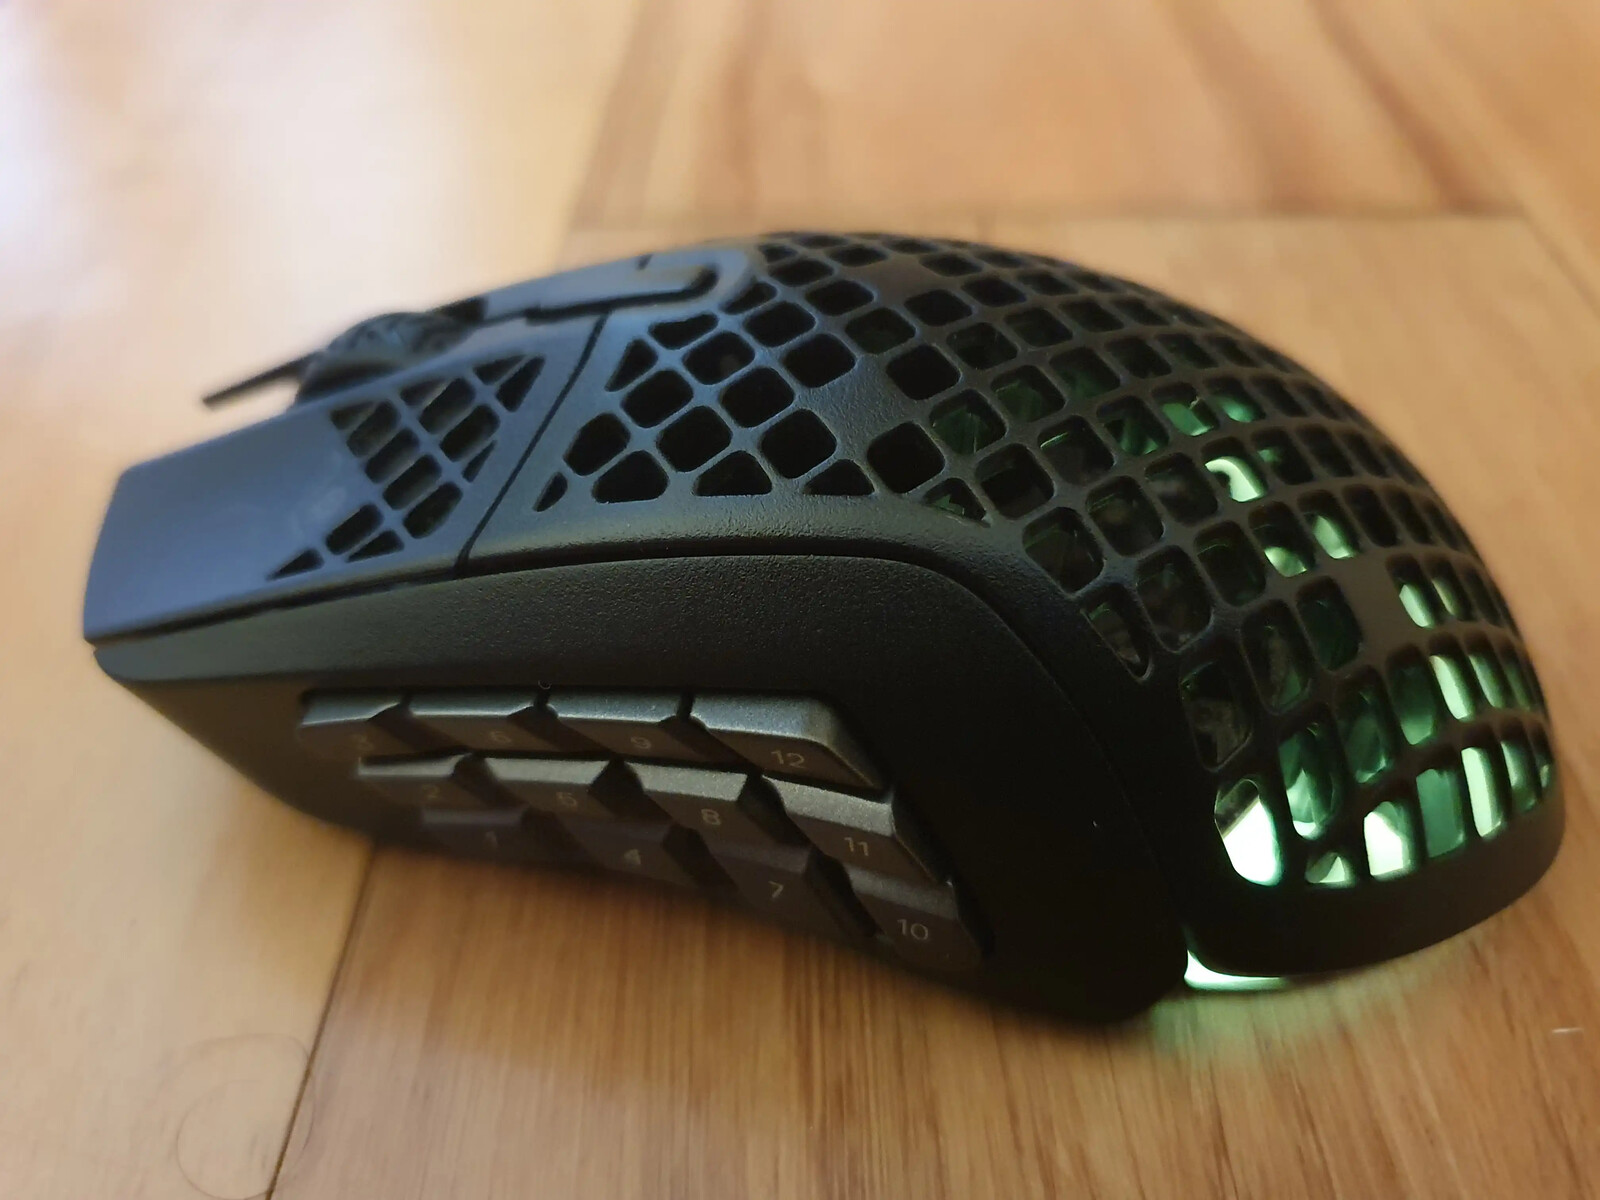 How To Make A Gaming Mouse That Works On Windows 7 Work On Windows 10